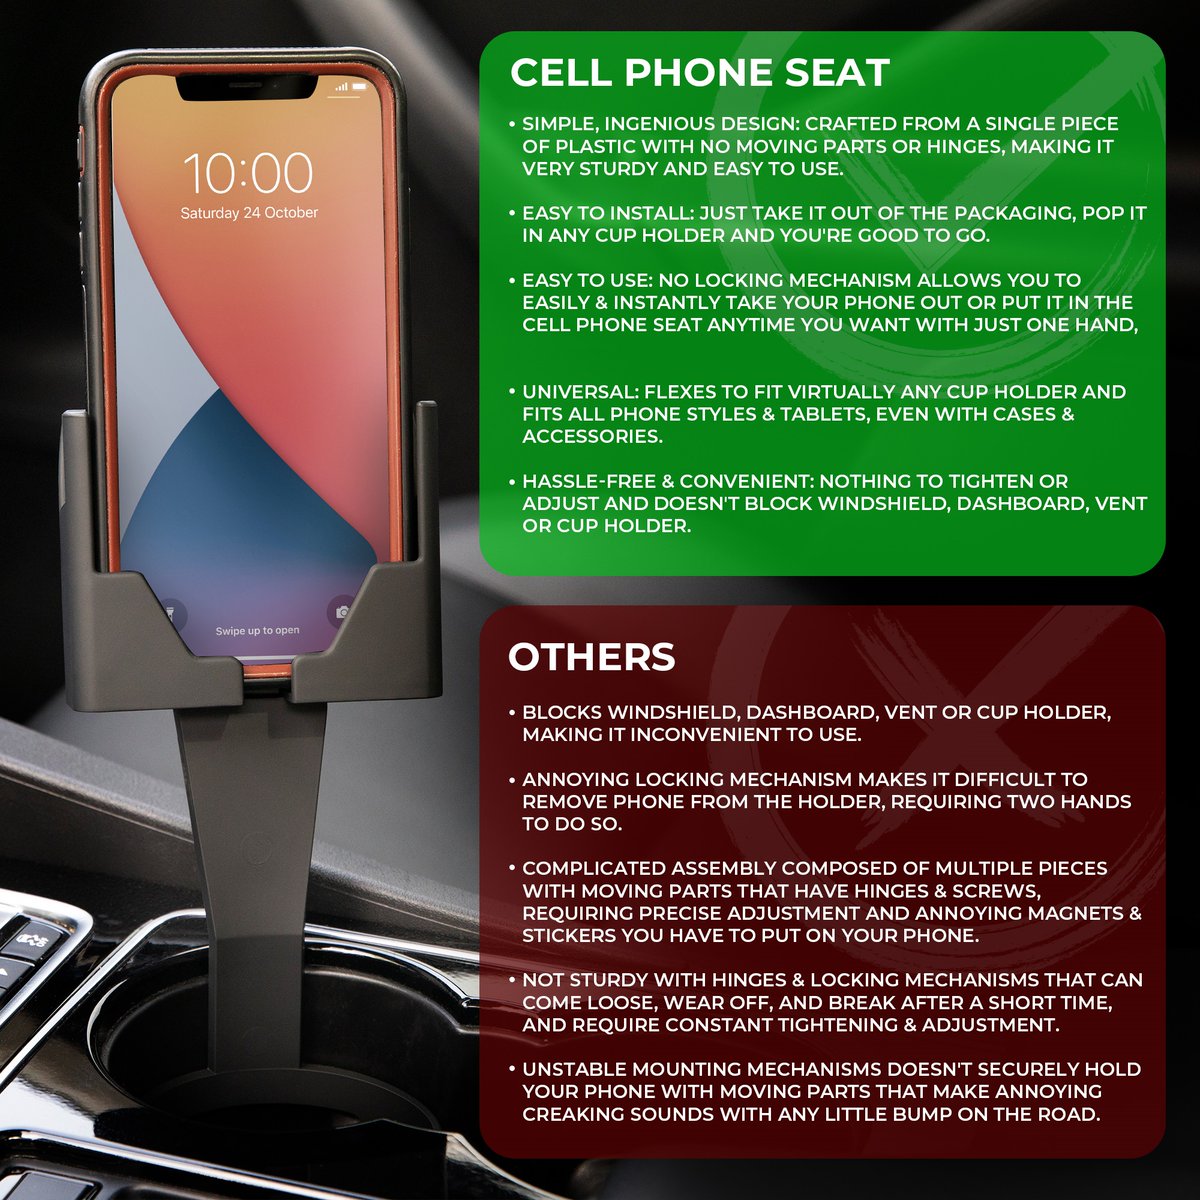 Resolve Your Road Woes with the Open Call, Cell Phone Seat — the perfect hands-free solution to keep your focus on the road . . .#safetyfirst #eyesontheroad #drivesafe #driveresponsibly #NoTextingWhileDriving #StaySafe #EyesOnTheRoad #DontTextAndDrive #RoadSafety #FocusOnTheRoad